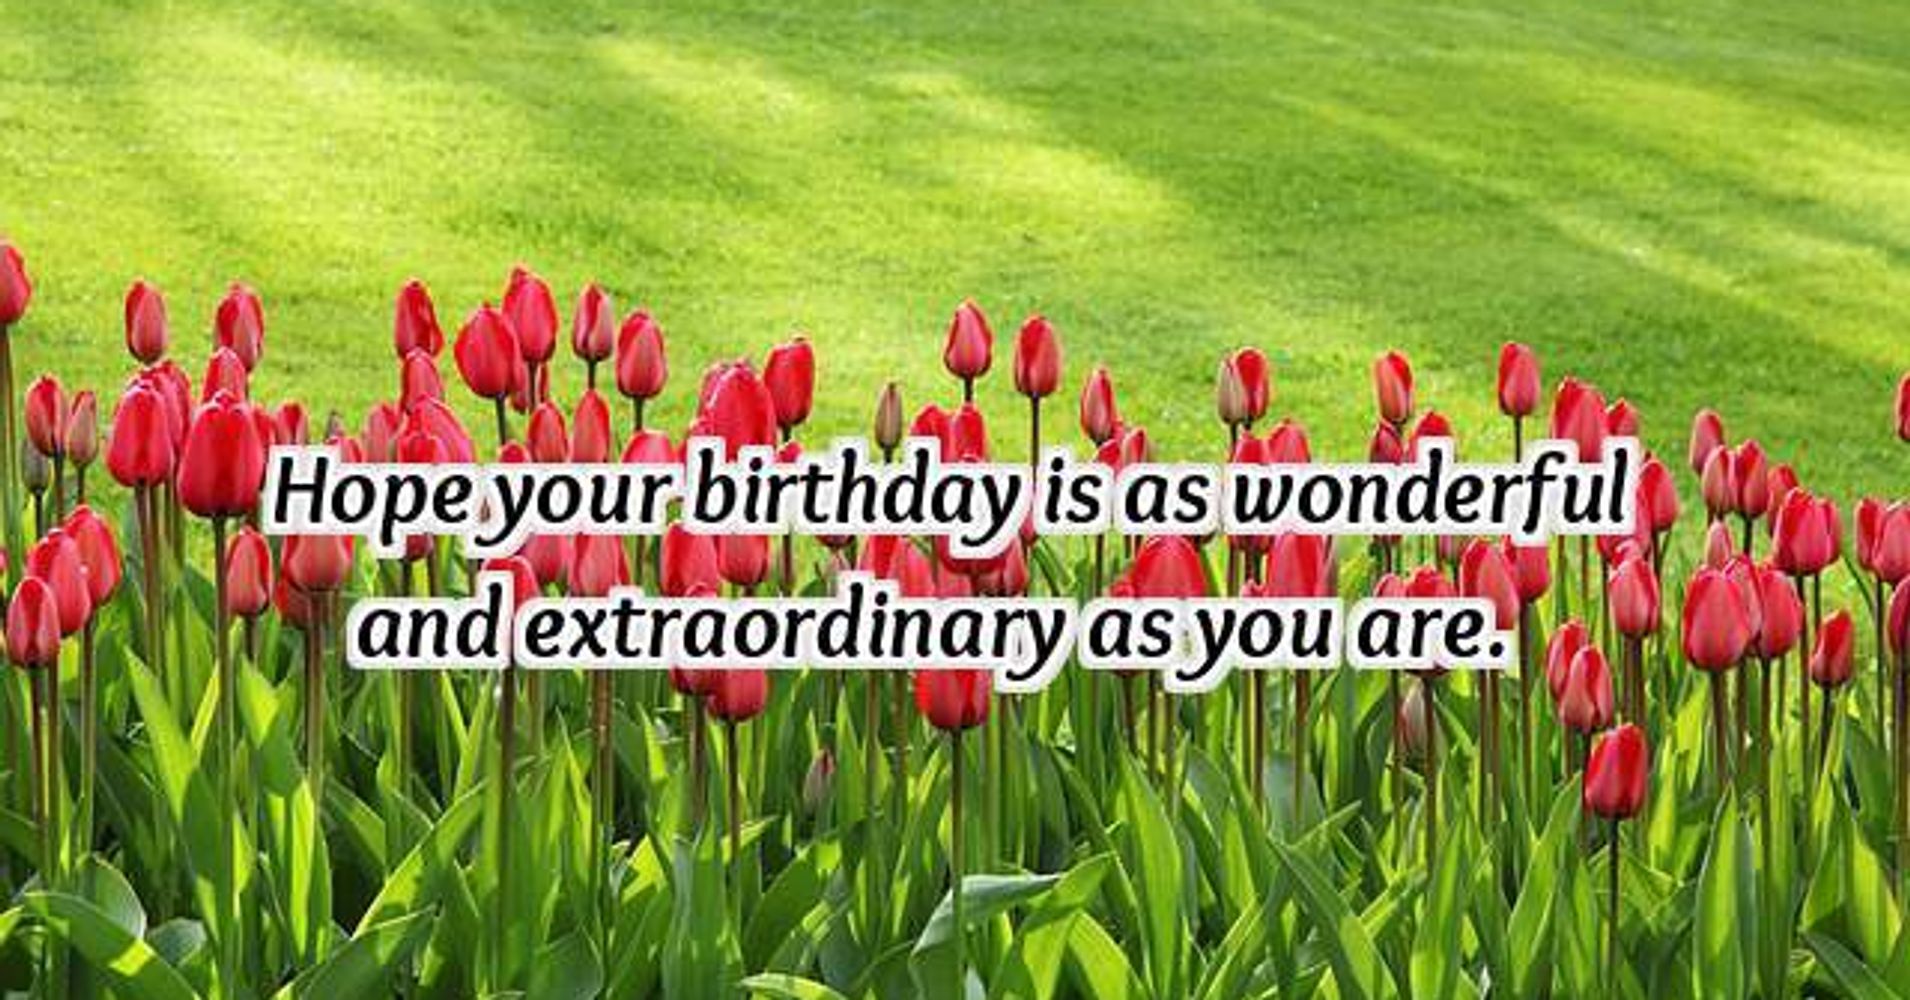 Funny Quotes On Friends Birthday In English